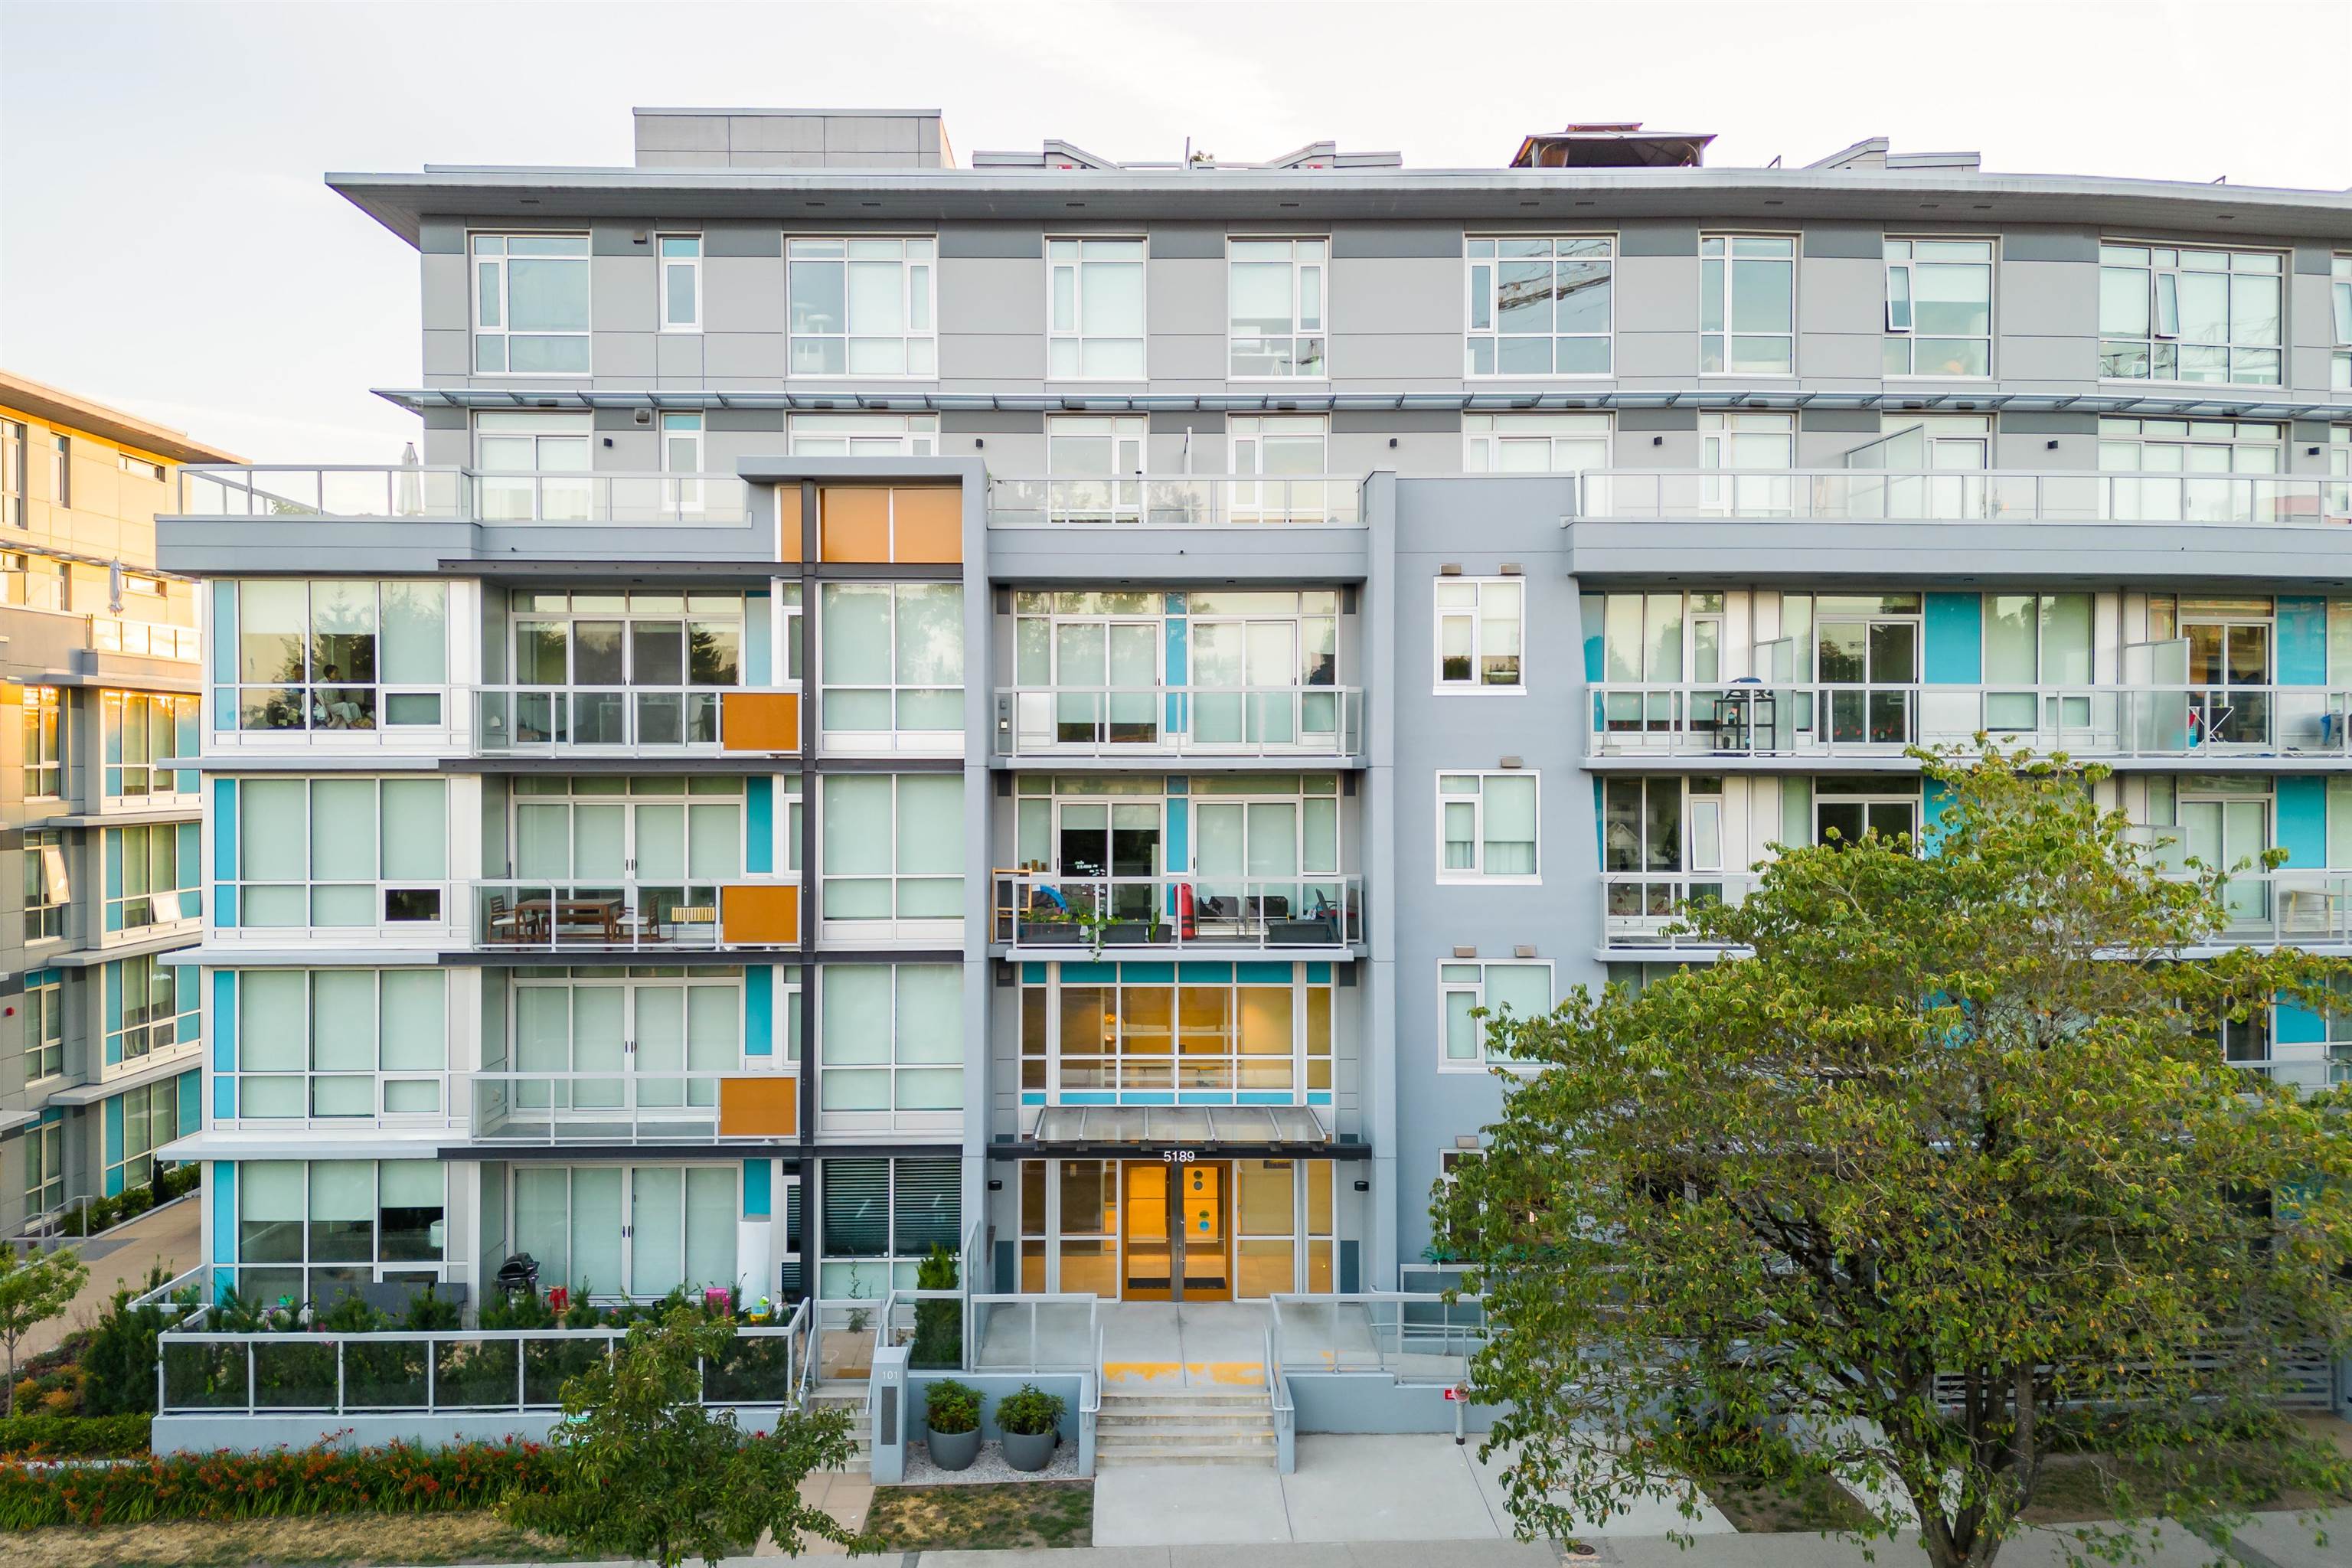 Listing image of 212 5189 CAMBIE STREET